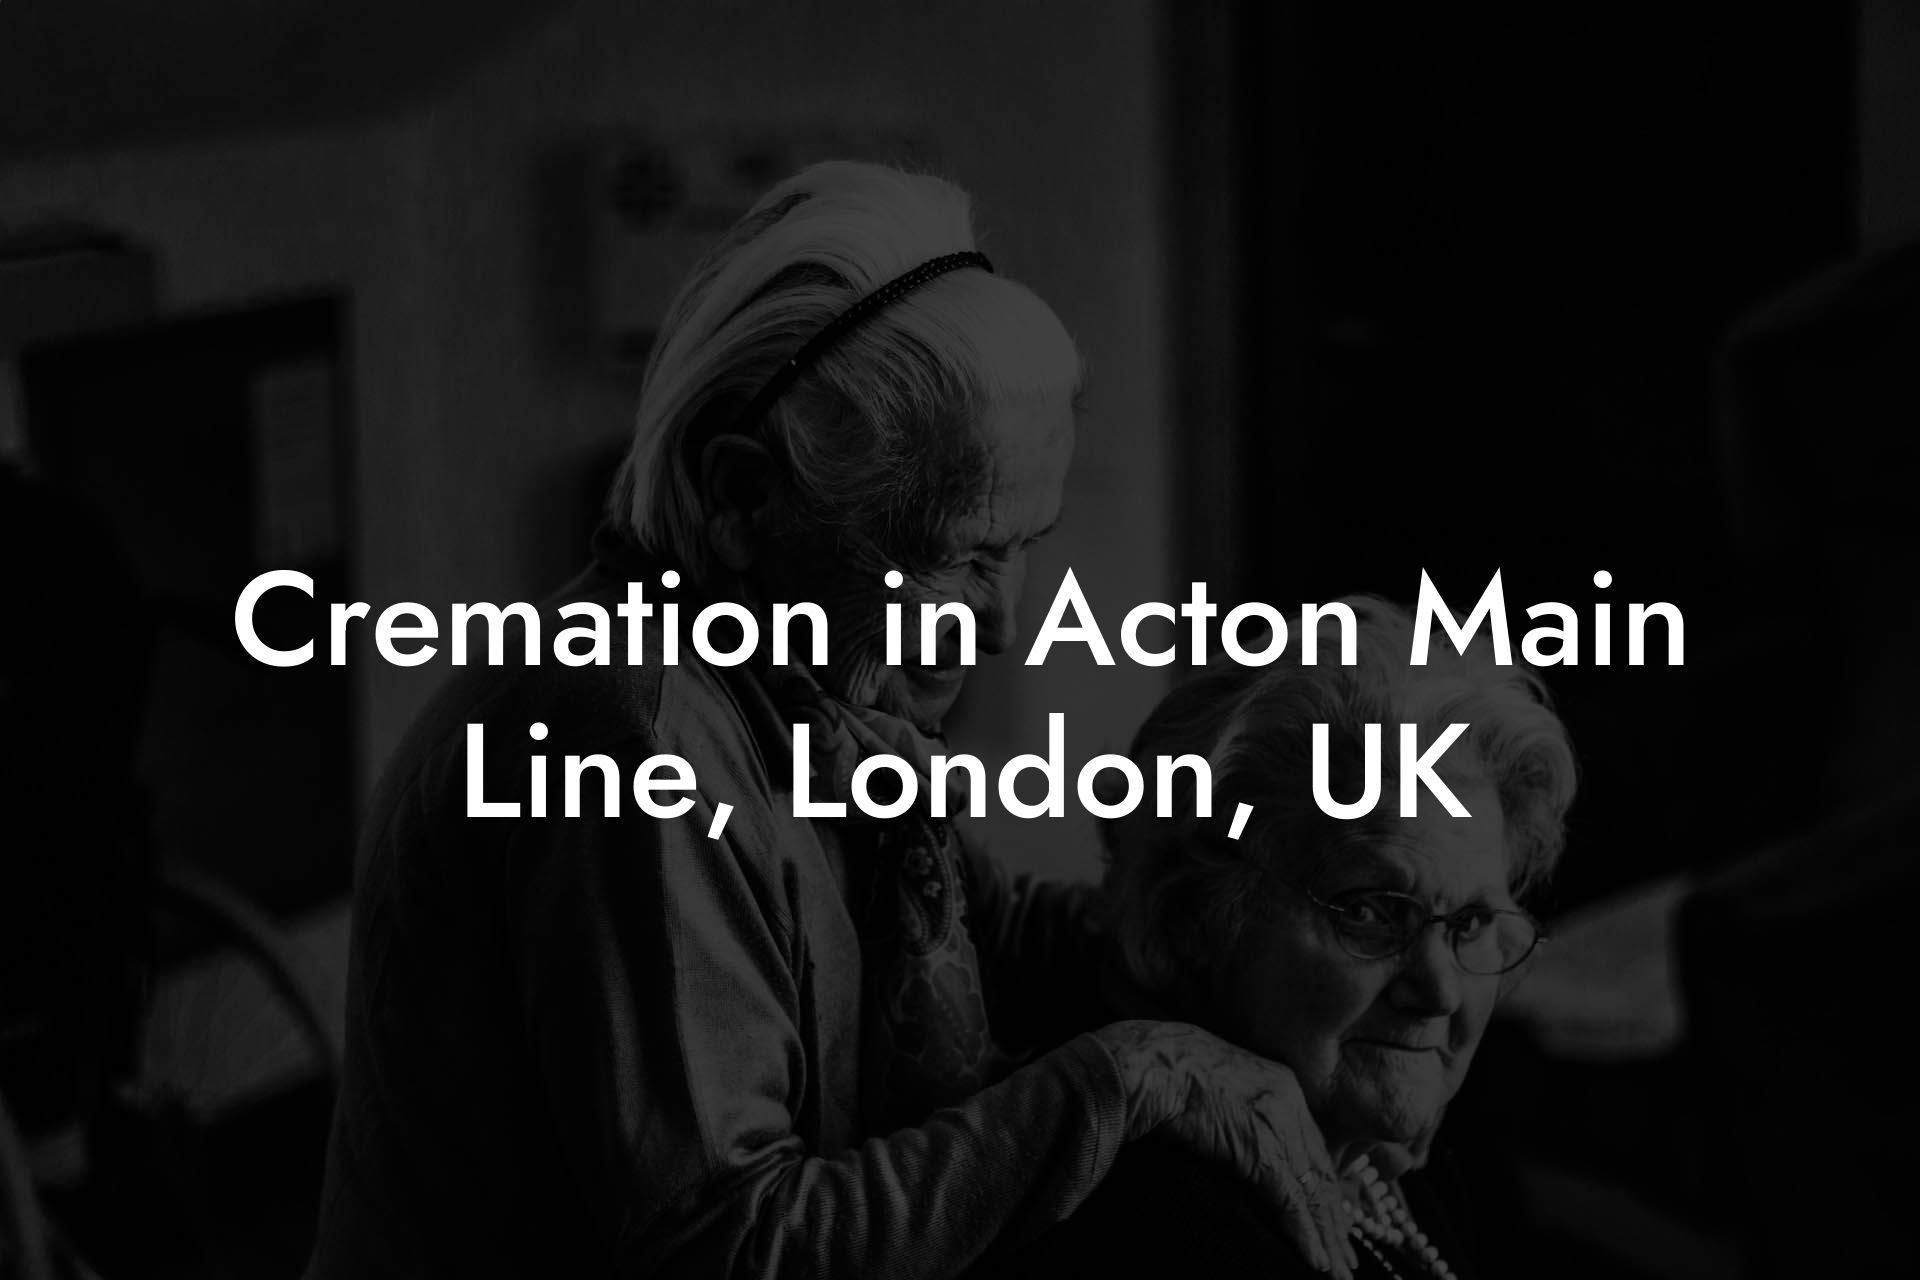 Cremation in Acton Main Line, London, UK